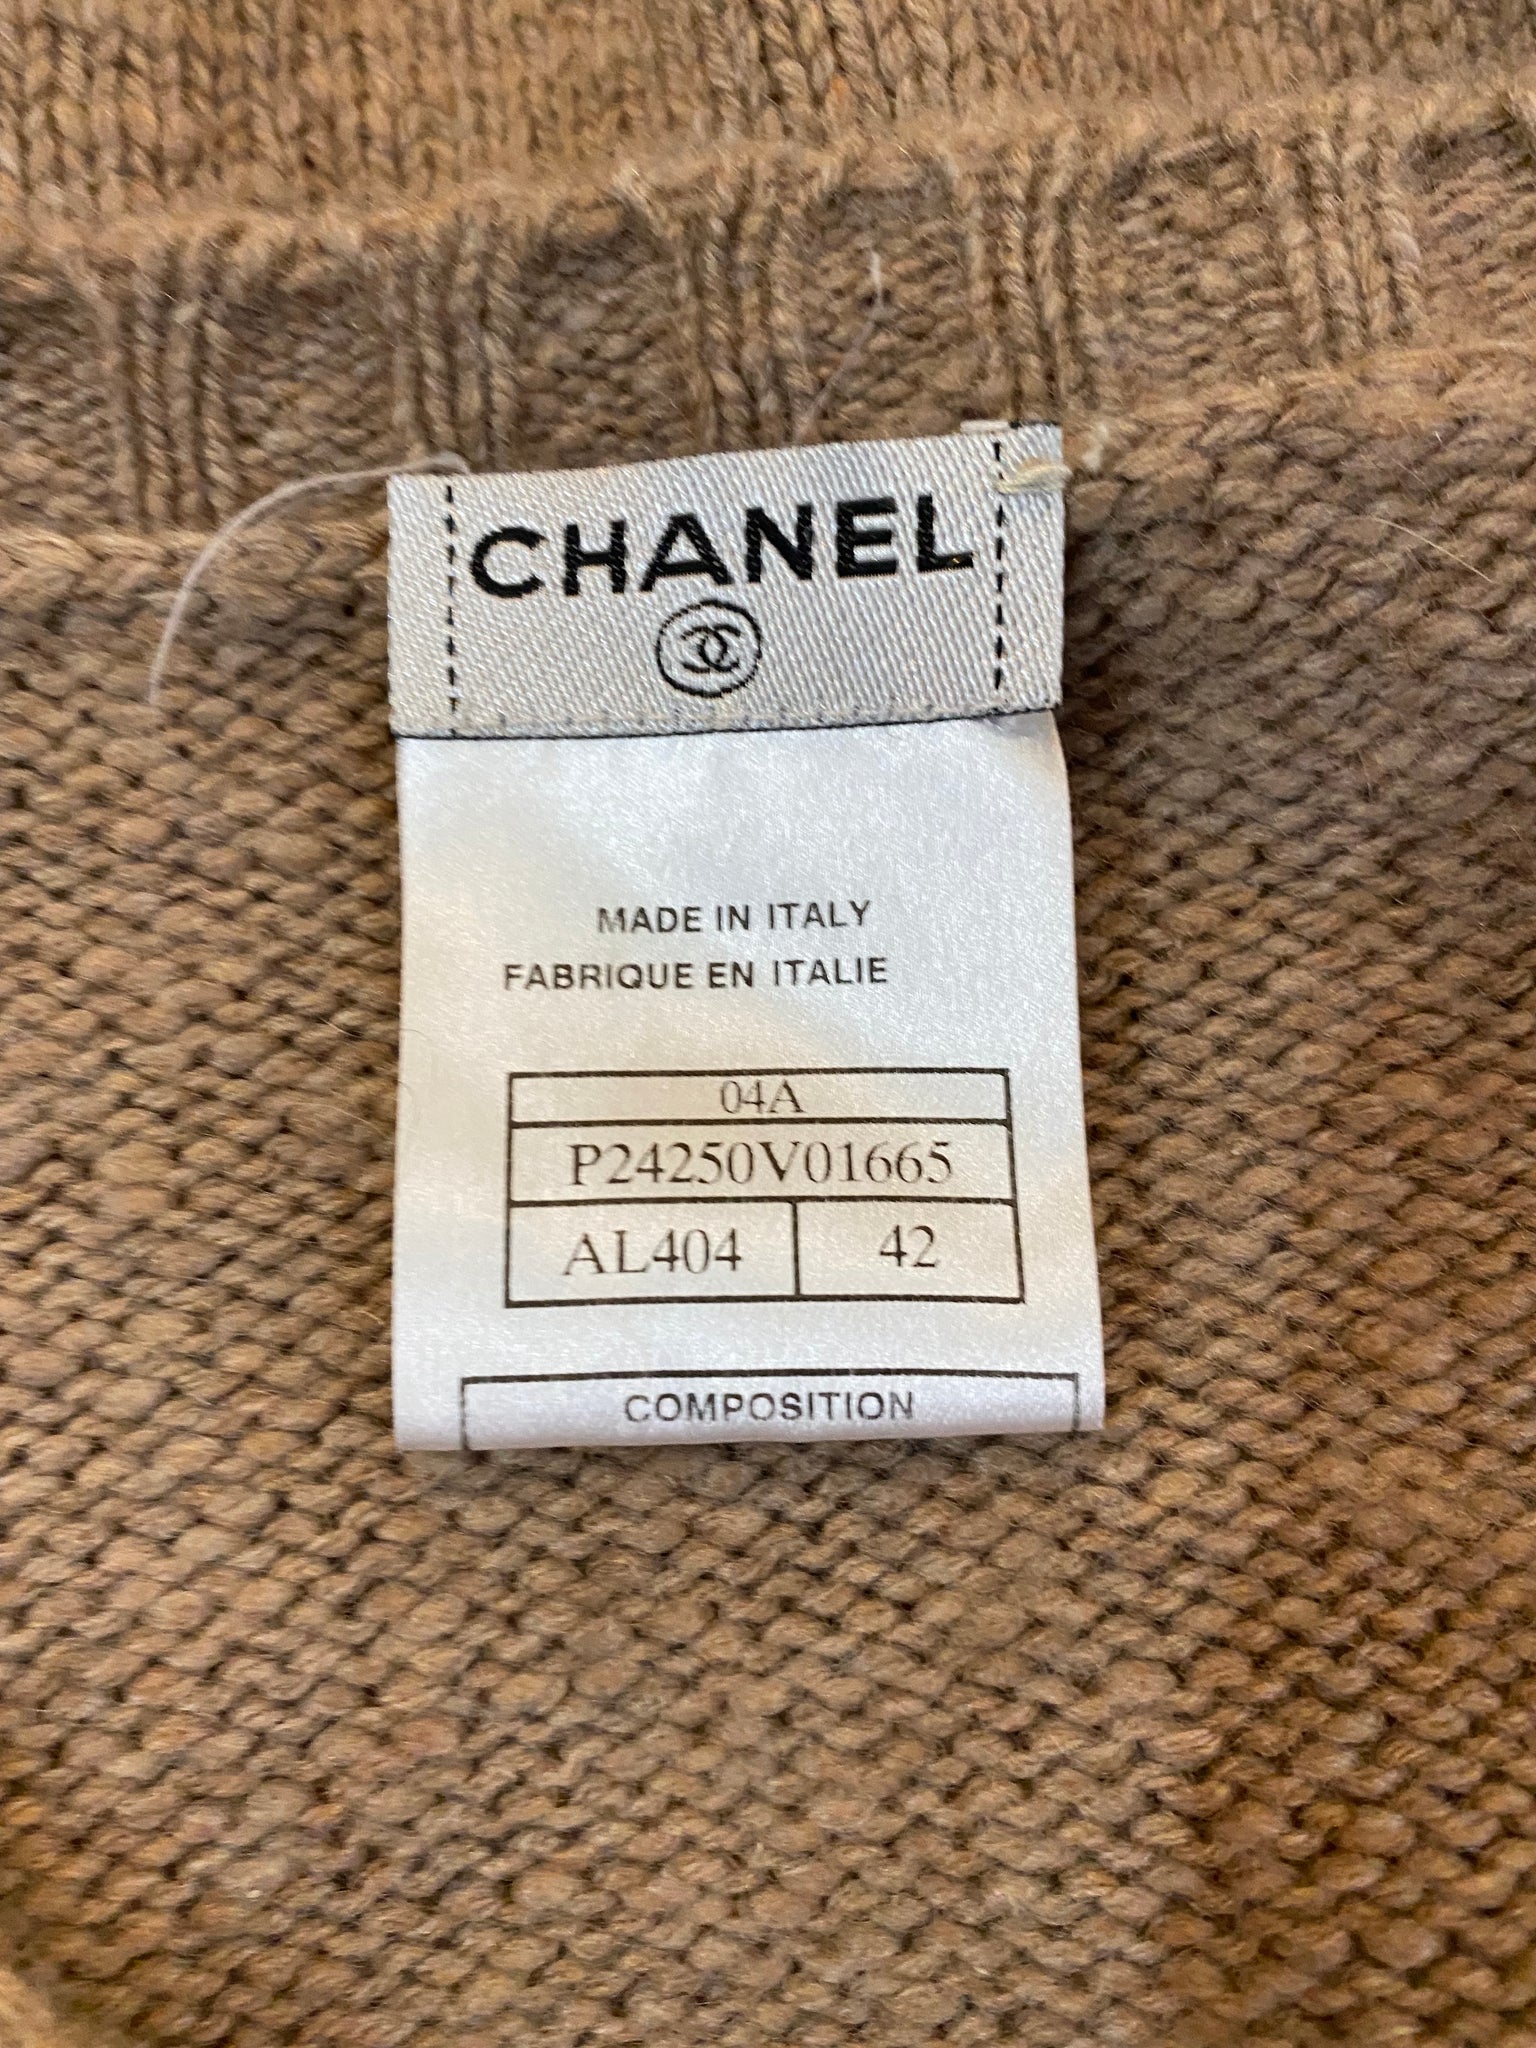 Chanel  Oatmeal Cashmere Cardigan Sweater LABEL 5 of 5